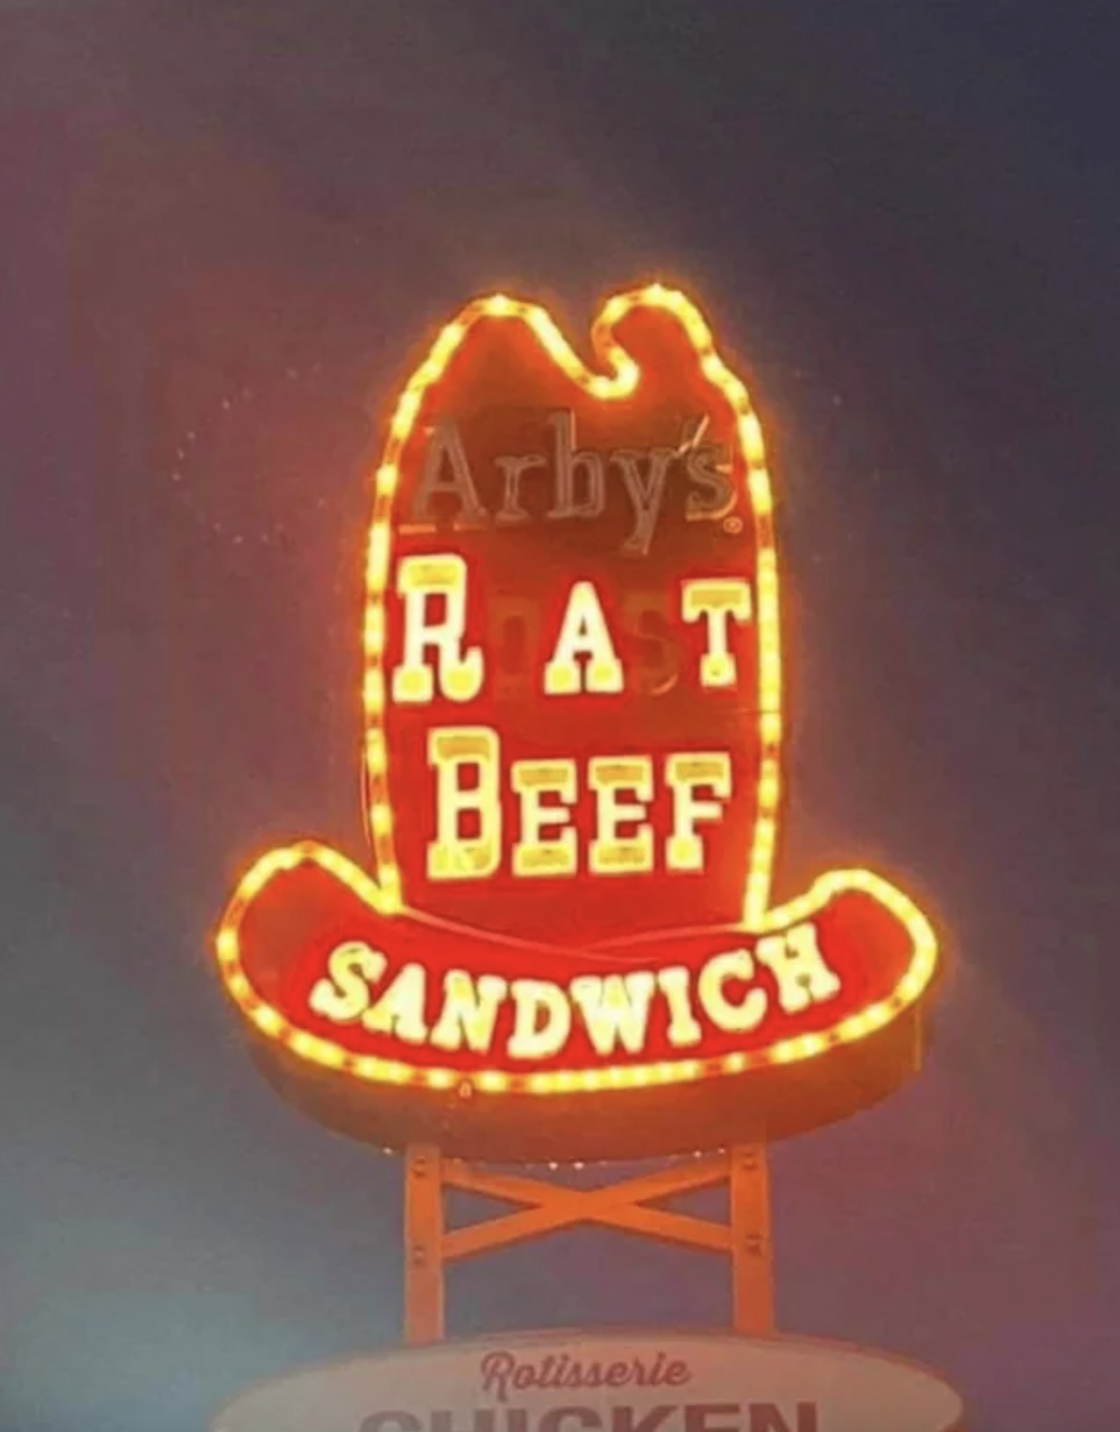 arby&#x27;s sign has letters that are out so it reads rat beef sandwich